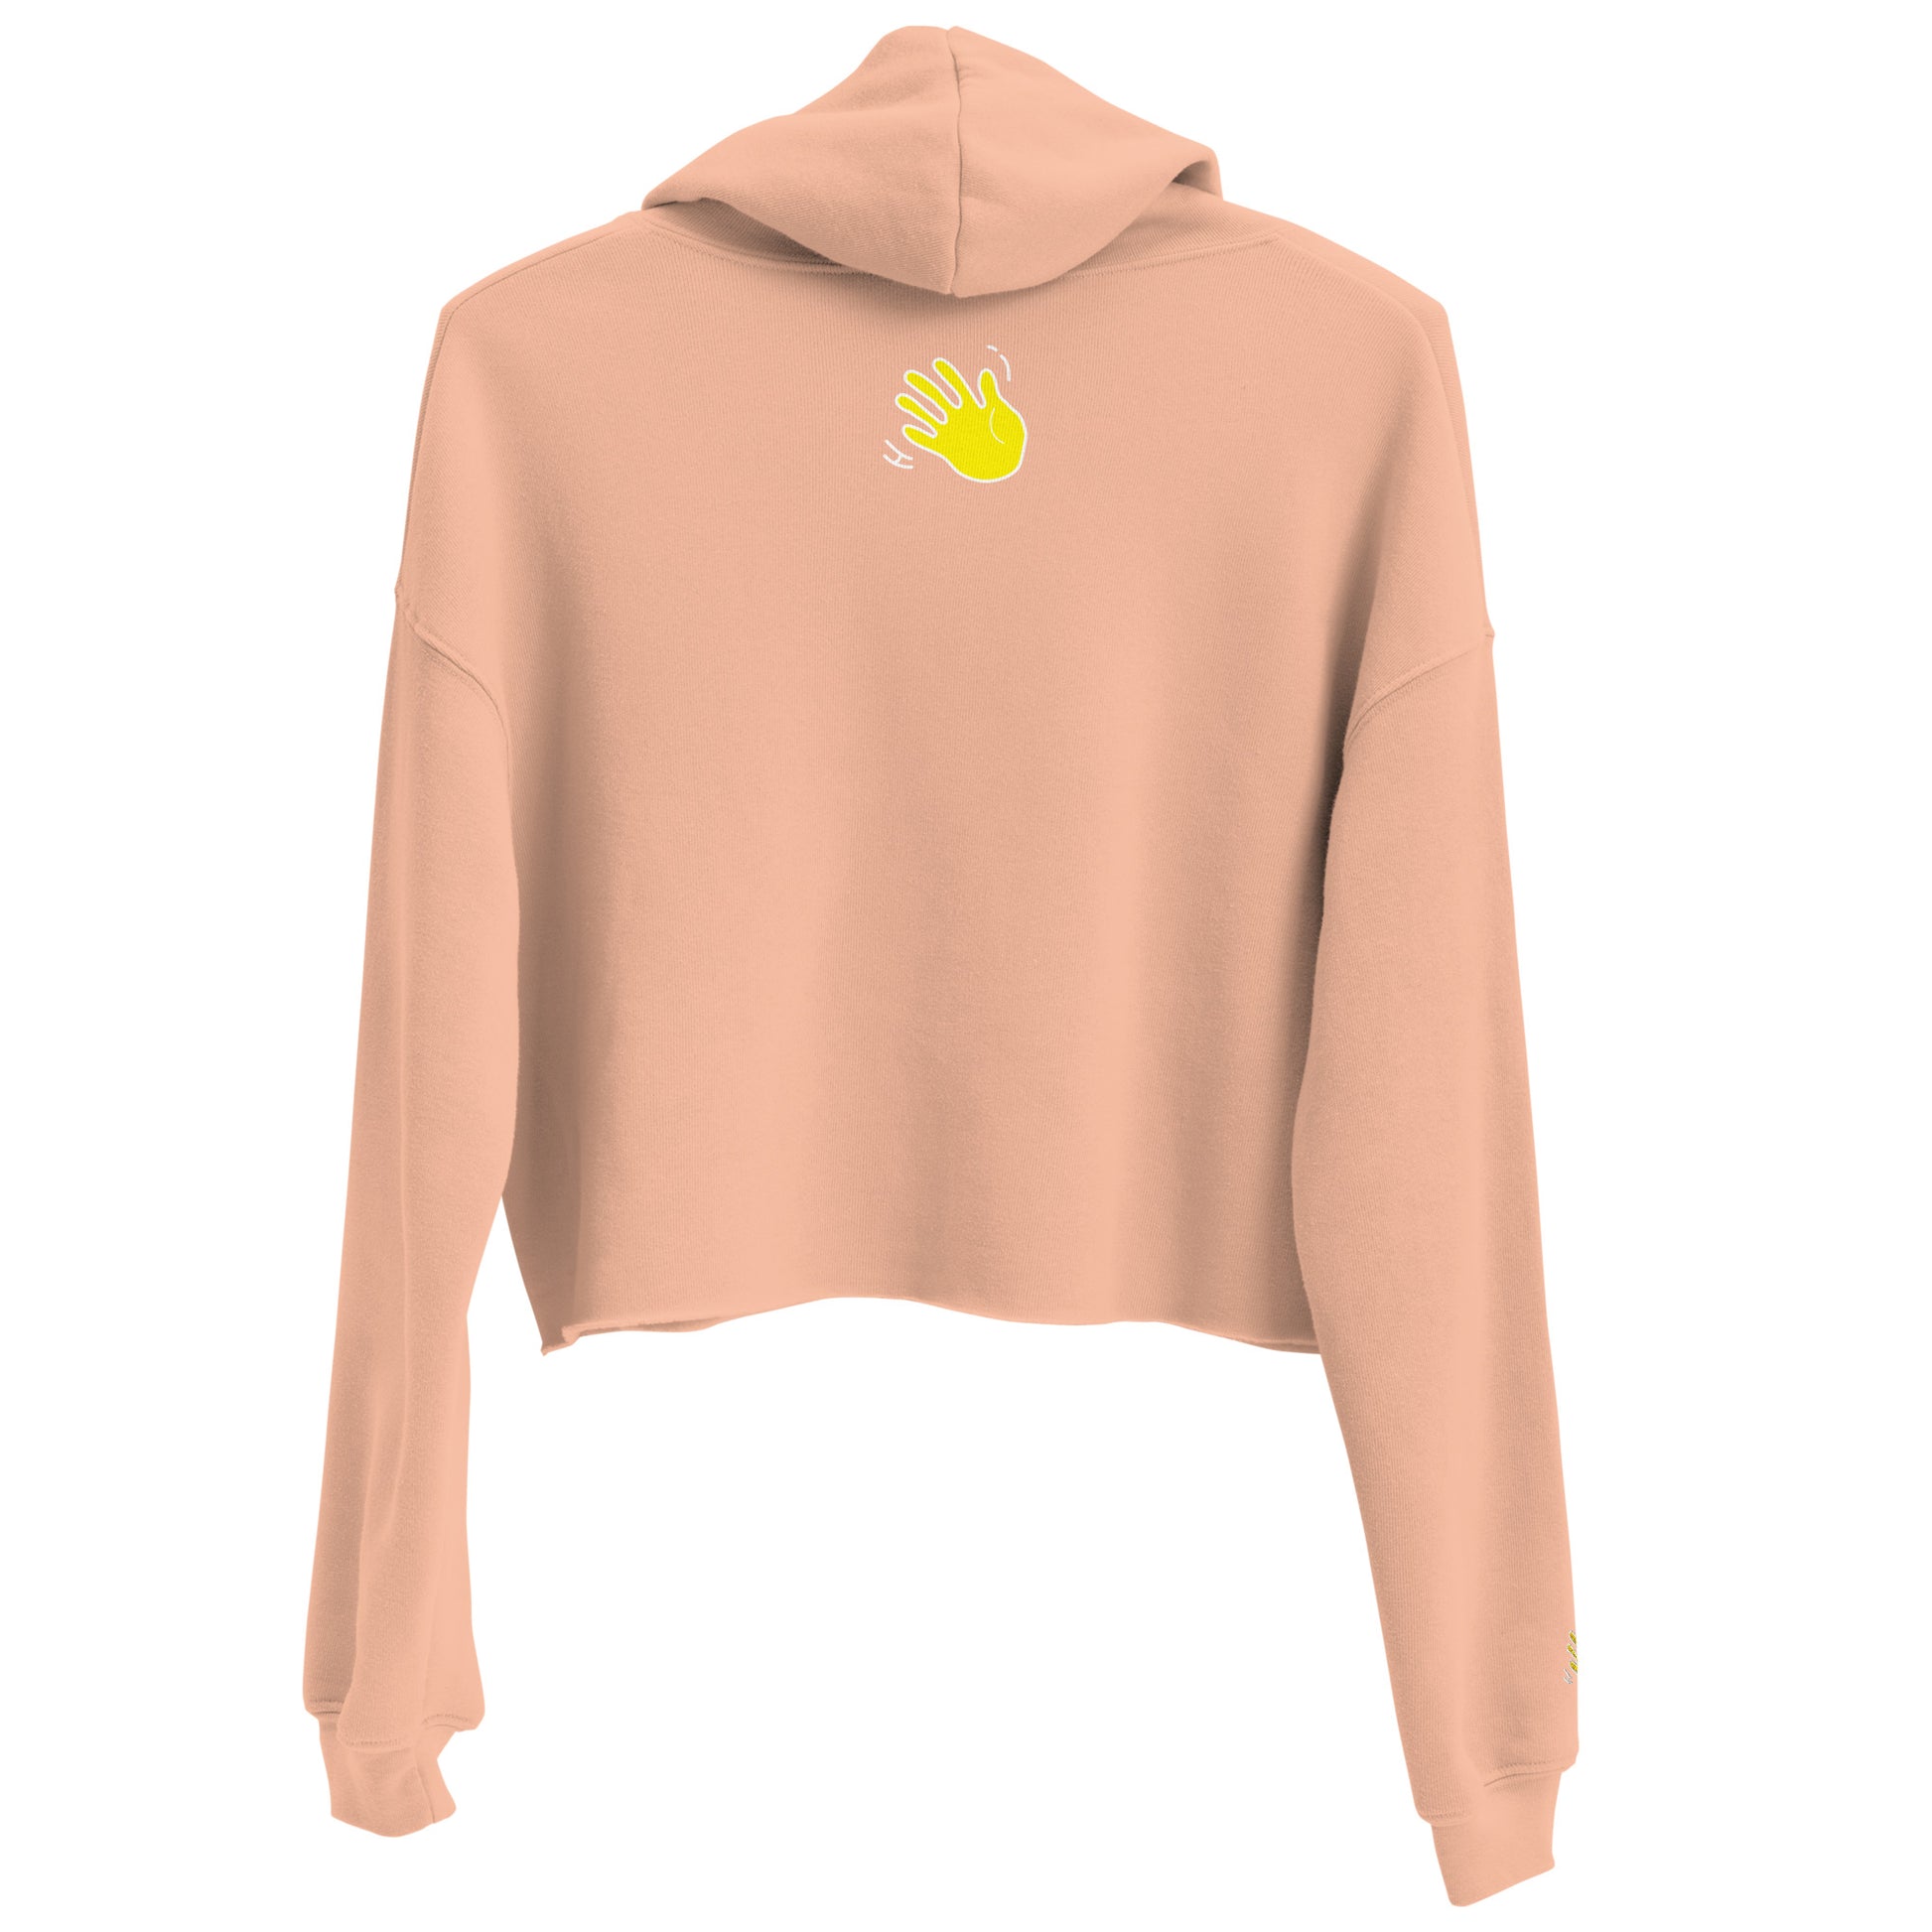 Hi Womens Cropped Hoodie by Happy interactions in Peach